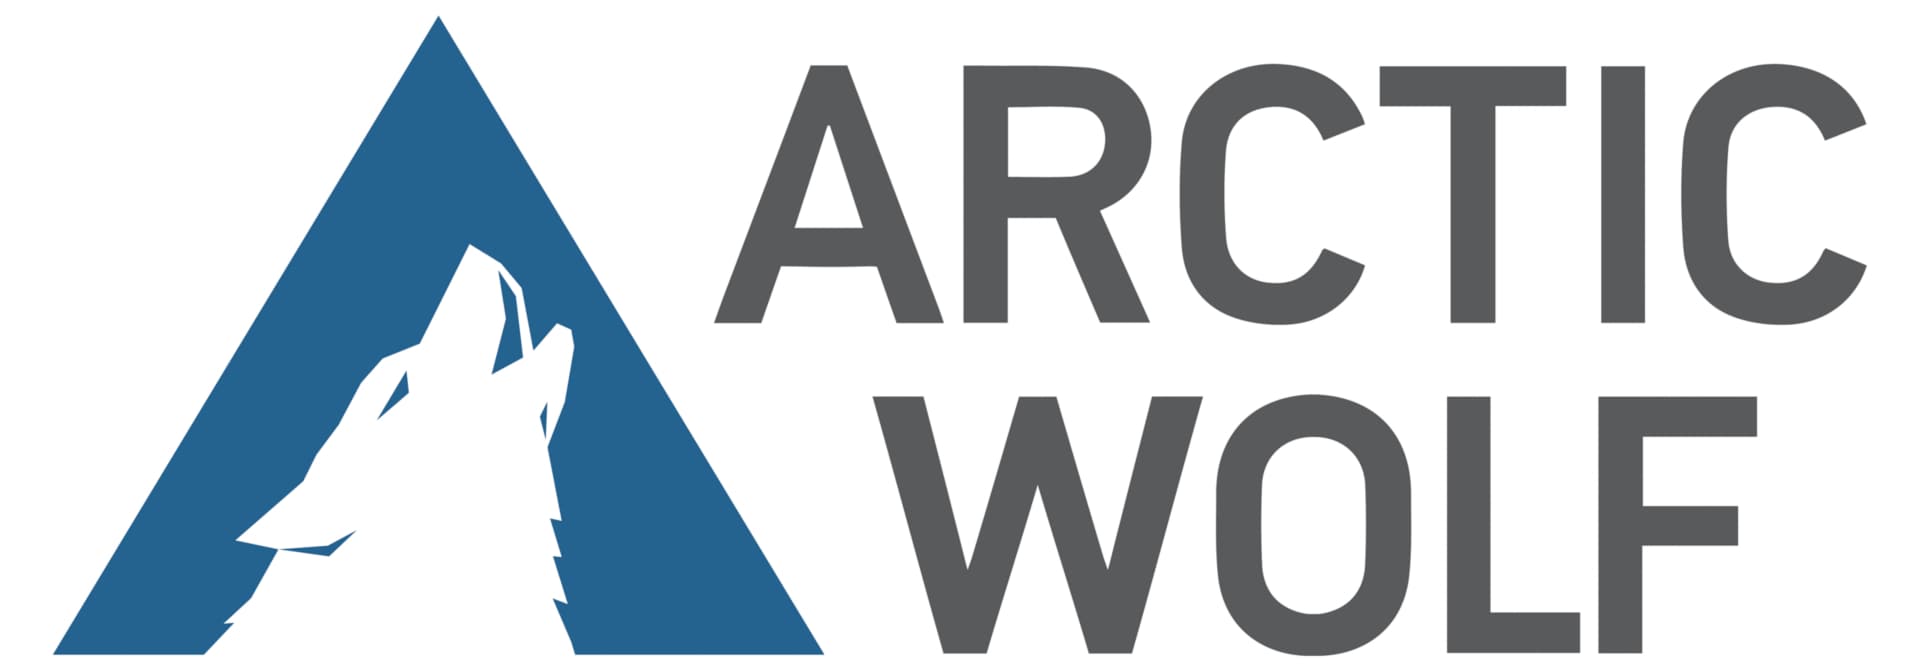 Arctic Wolf Managed Detection and Response - subscription license (7 years) - 1 license